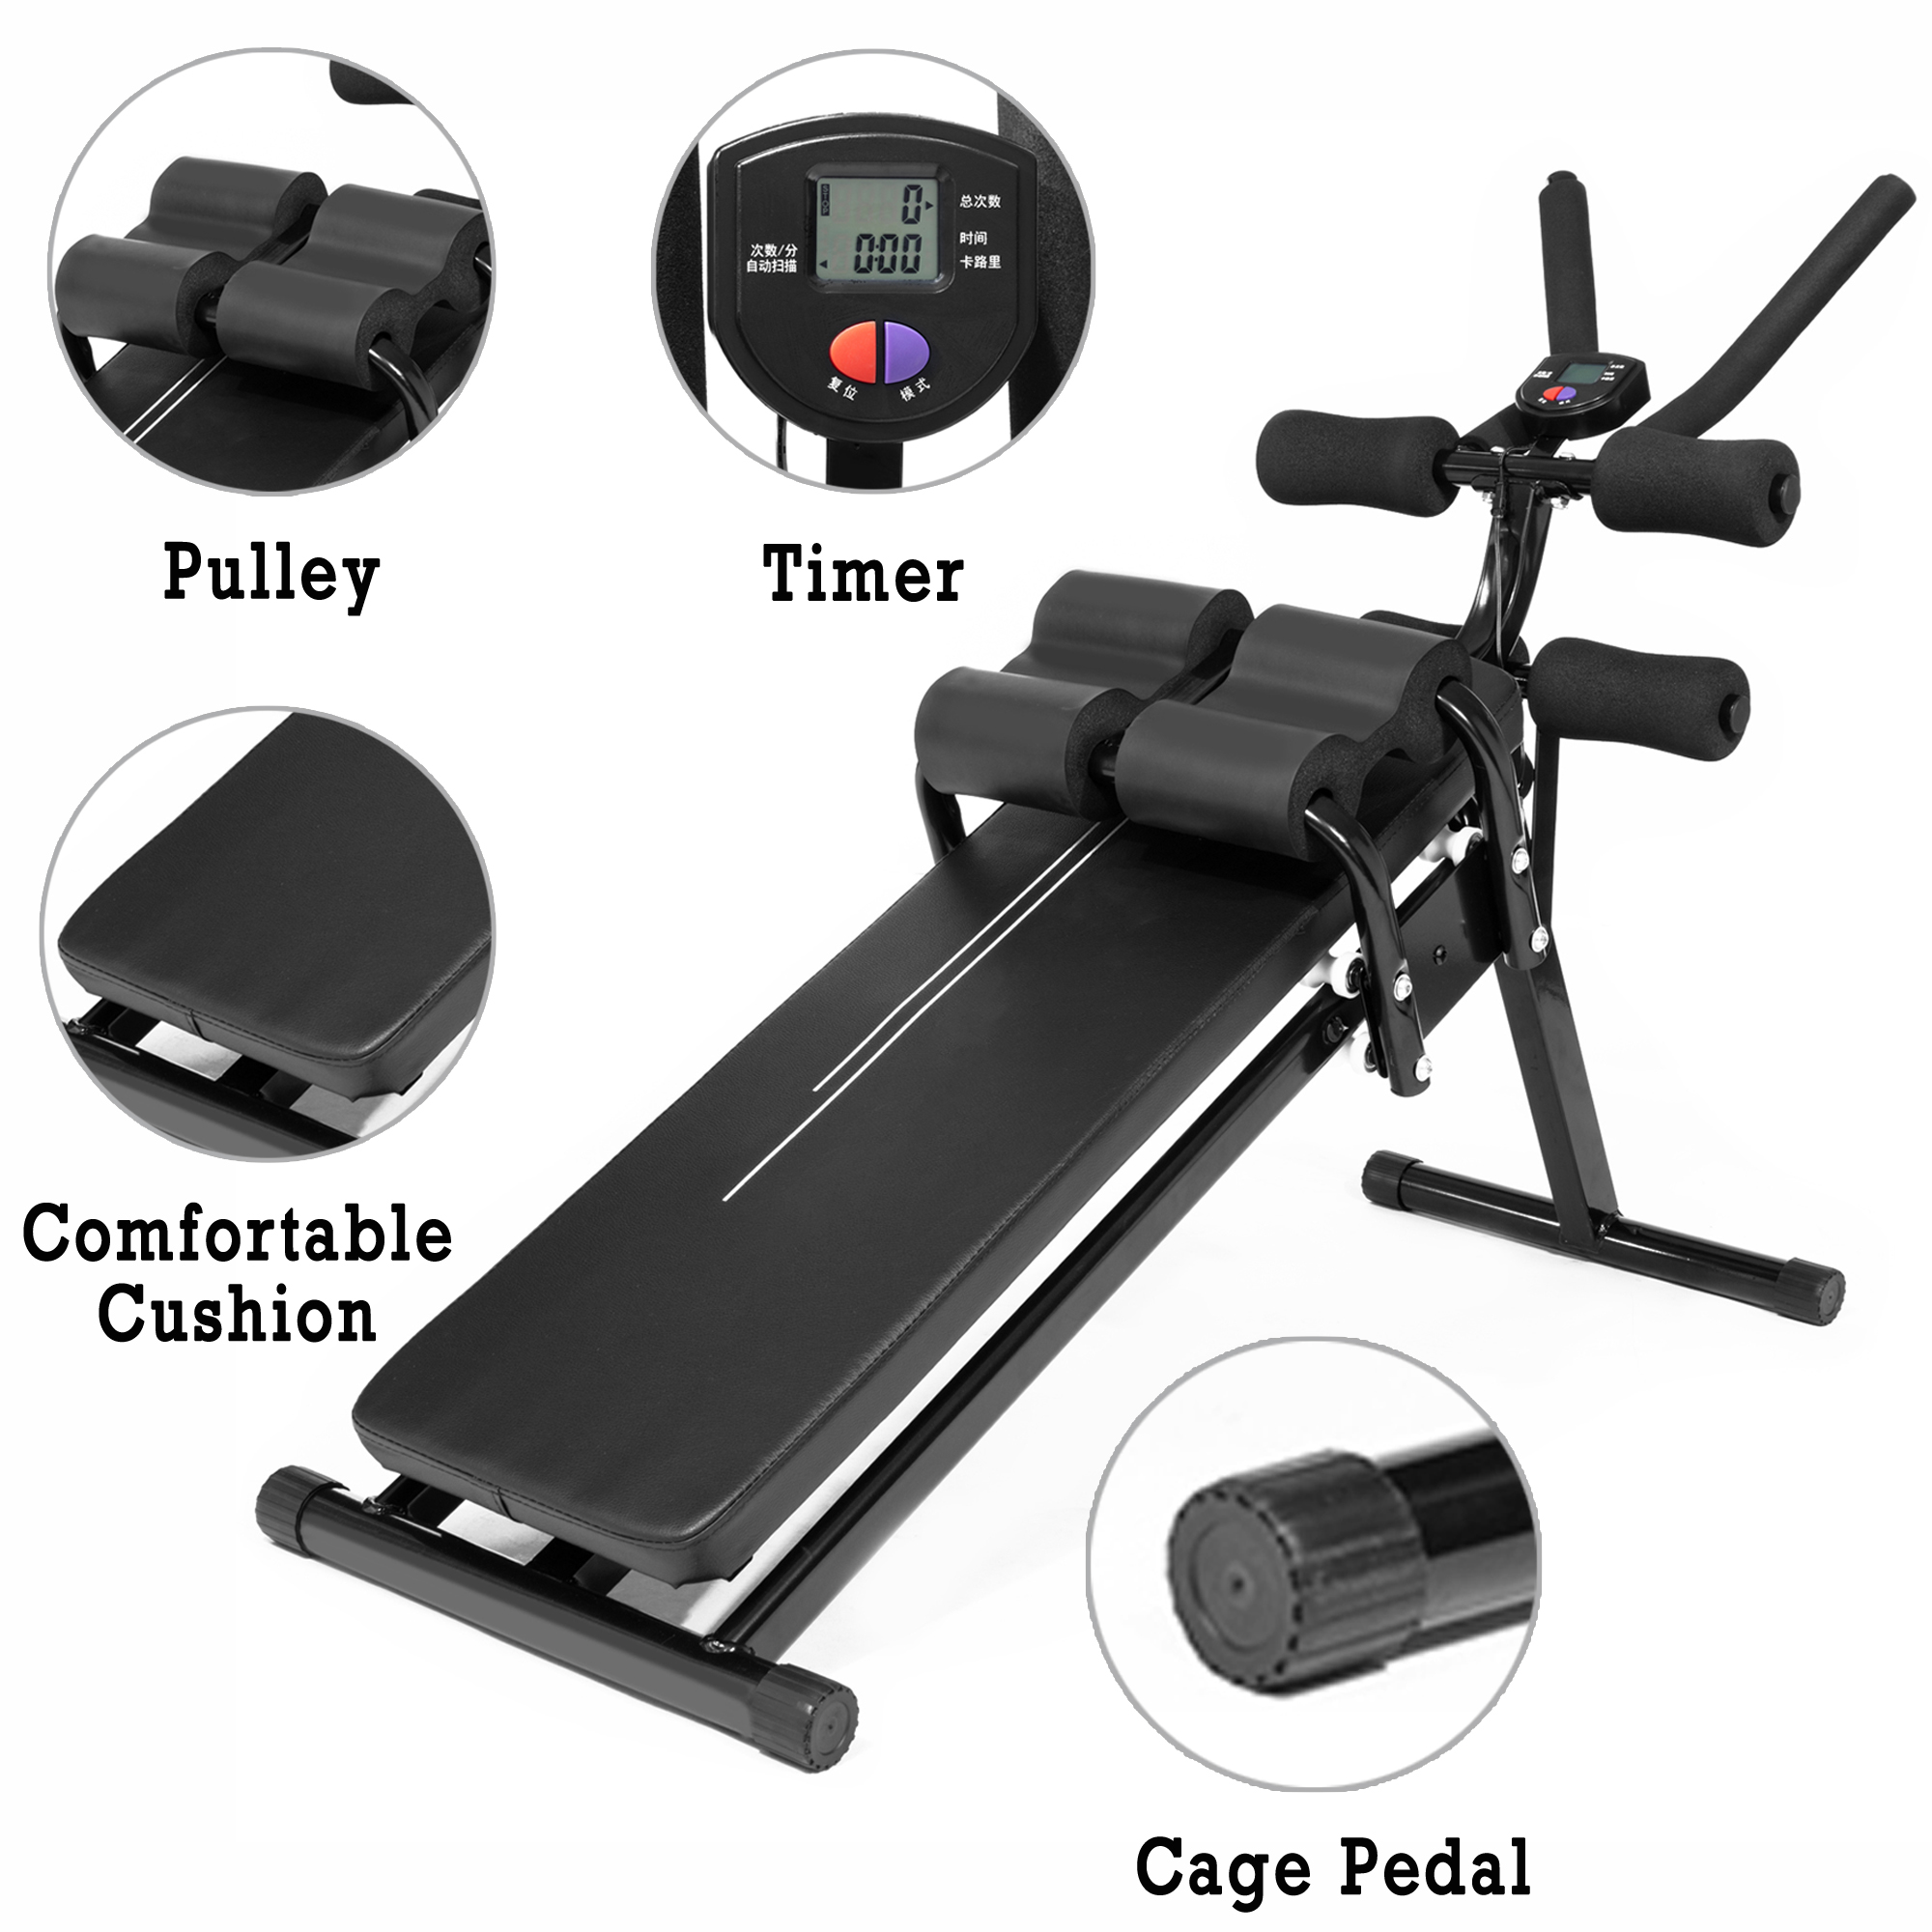 SAYFUT Roller Coaster Abdominal Machine Waist Fitness Equipment Abdomen Exercise Machine with LCD Display, for Home Gym Muscle Build Fitness Workout - image 4 of 7